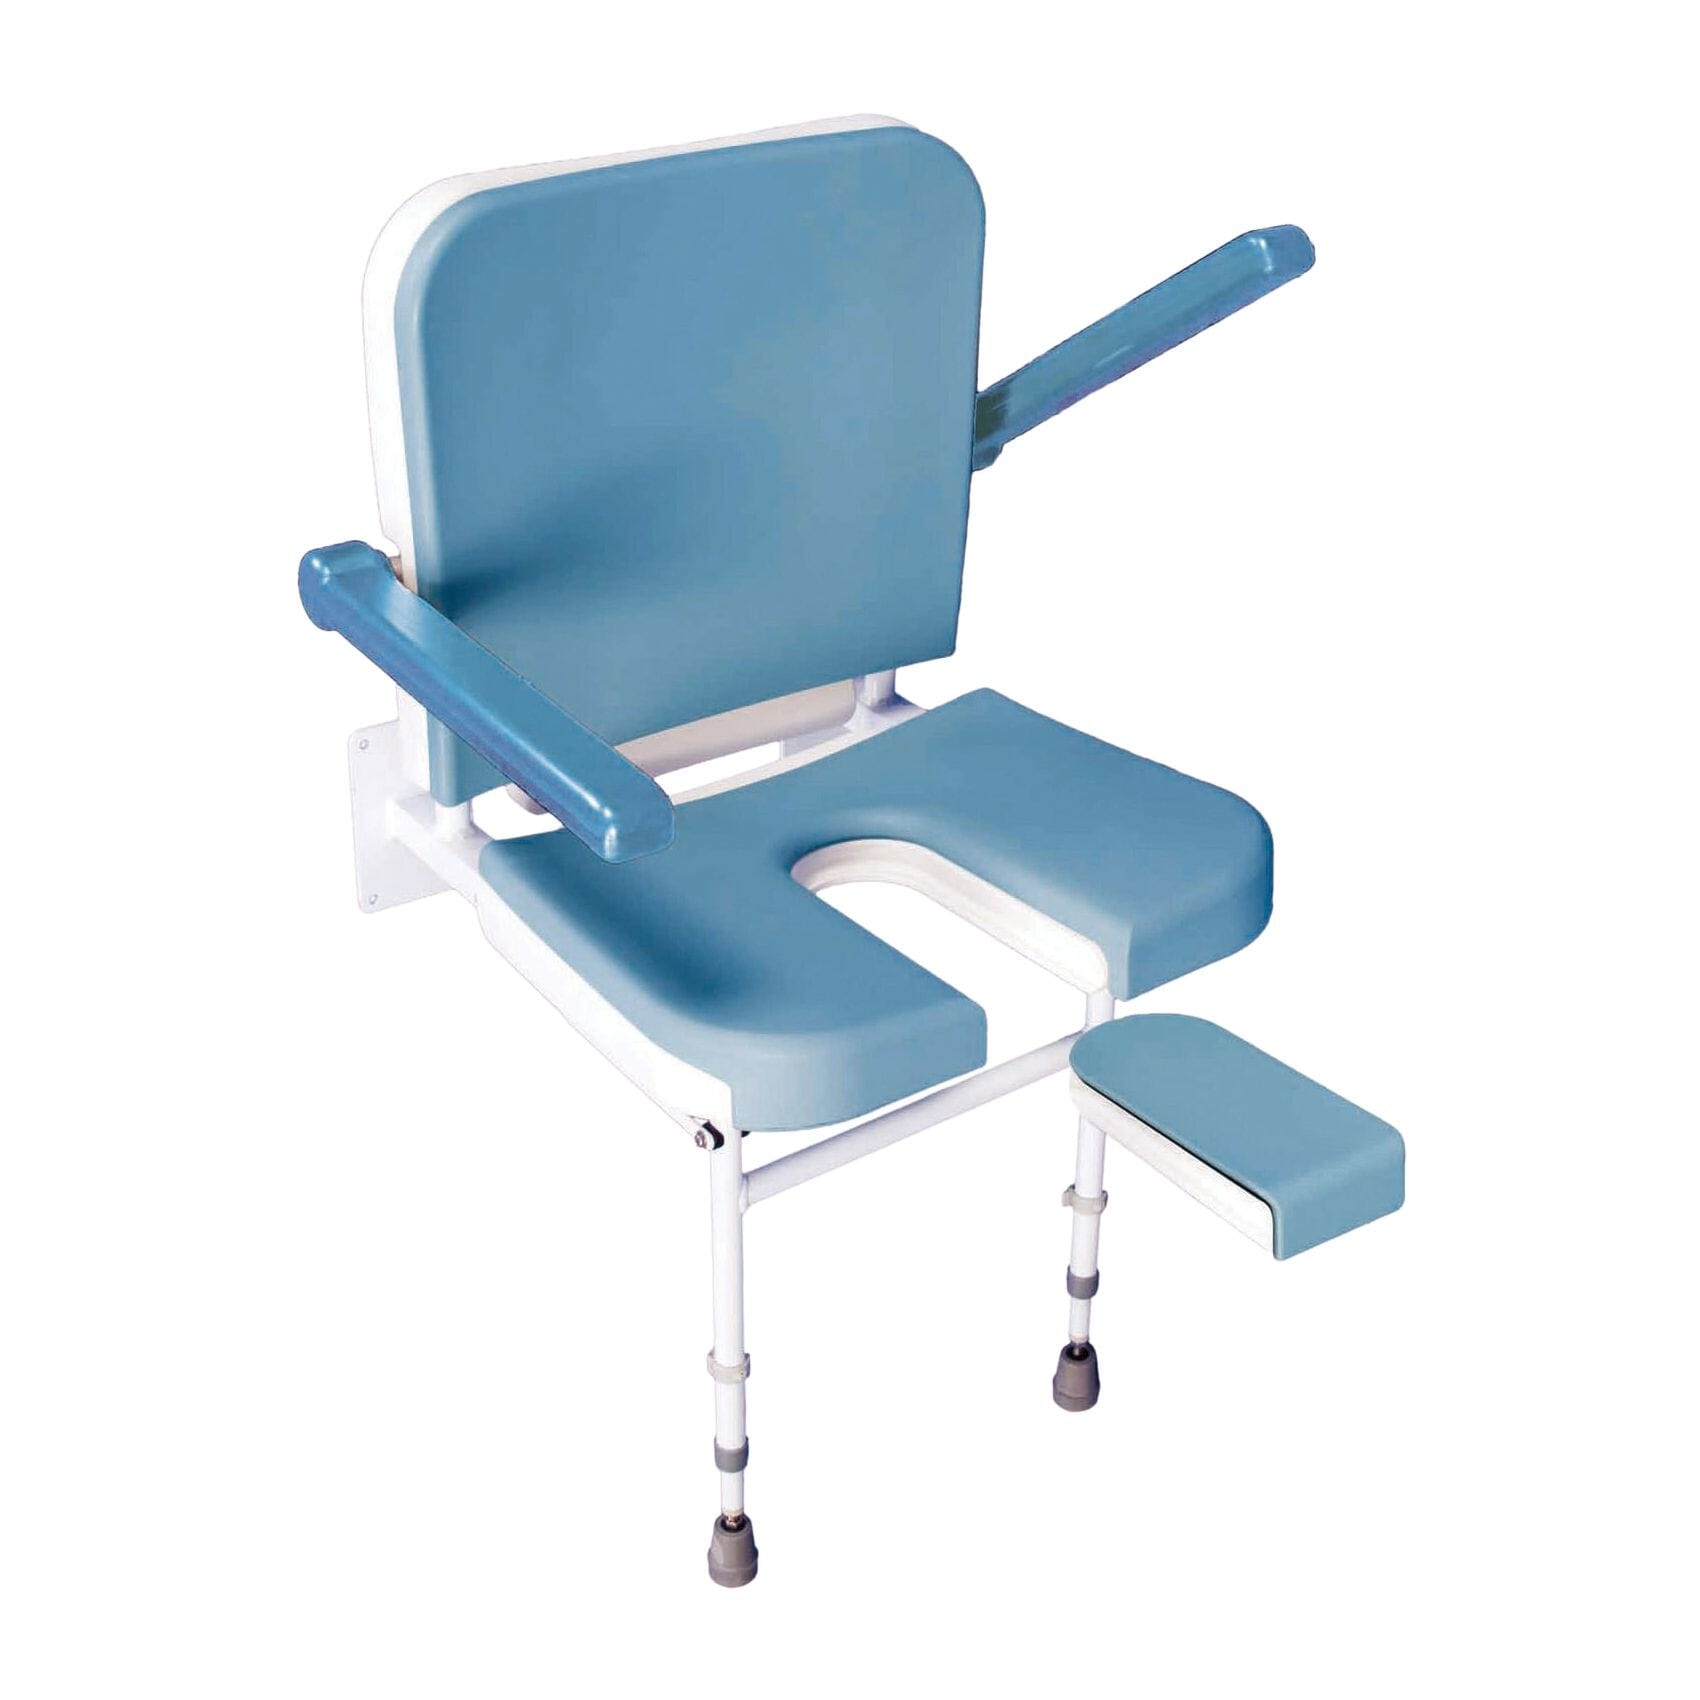 Swivel Seat Deluxe from Essential Aids